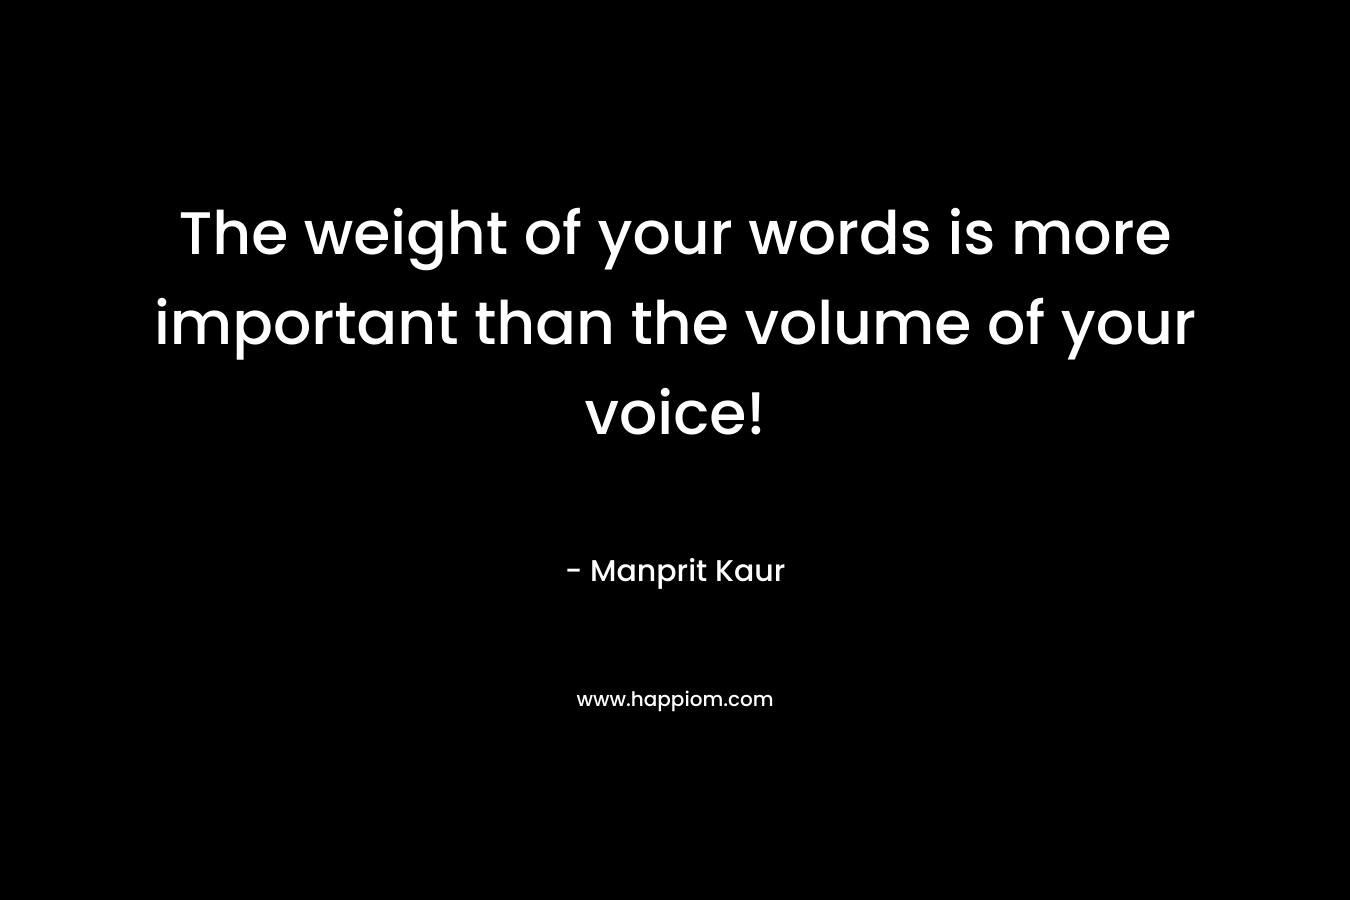 The weight of your words is more important than the volume of your voice!